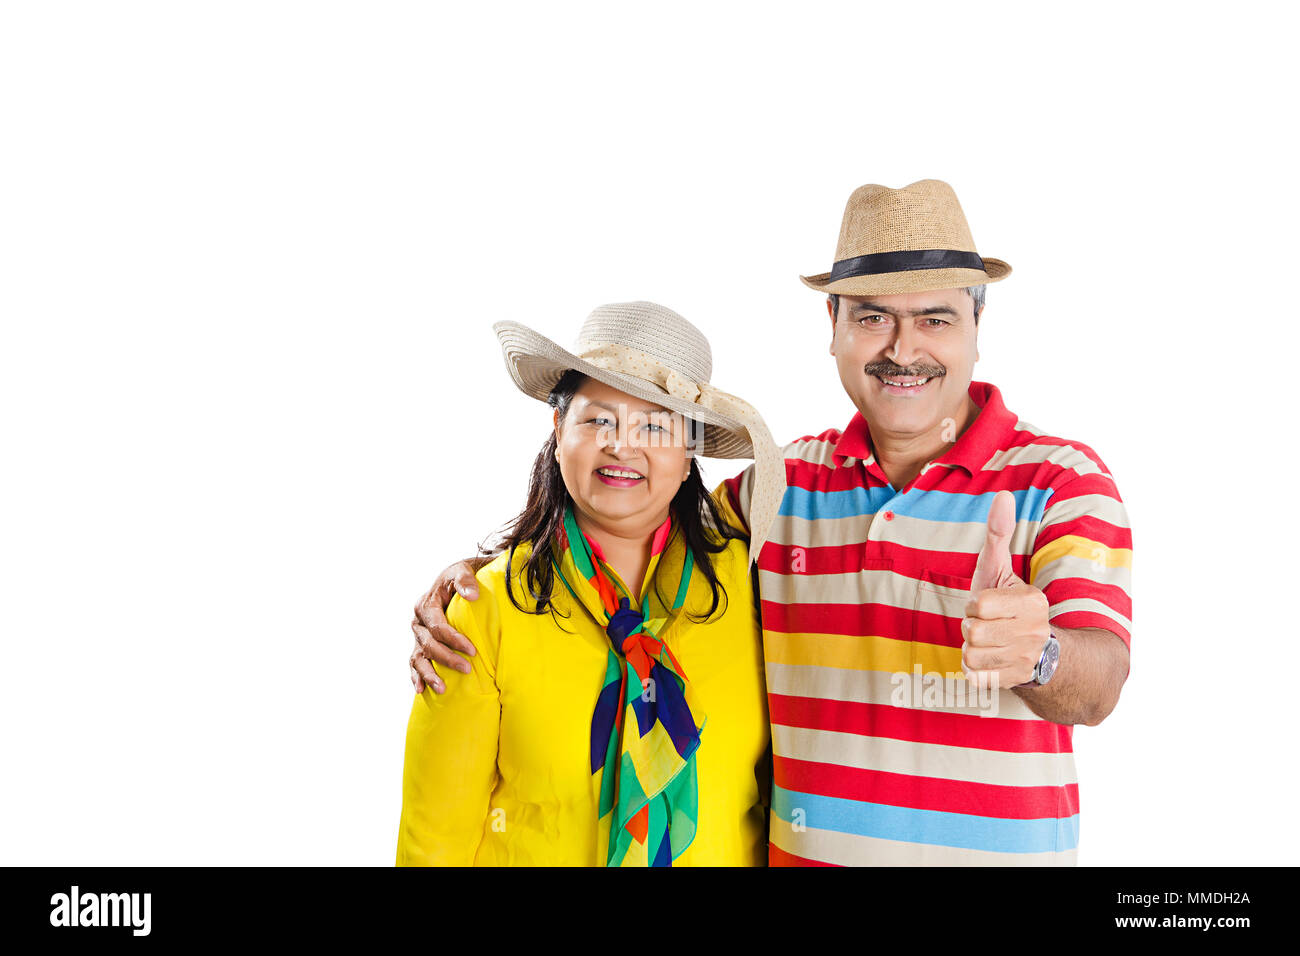 Smiling Senior Couple Together Wearing Cowboy hats Showing Thumbs-up Good-Luck Stock Photo